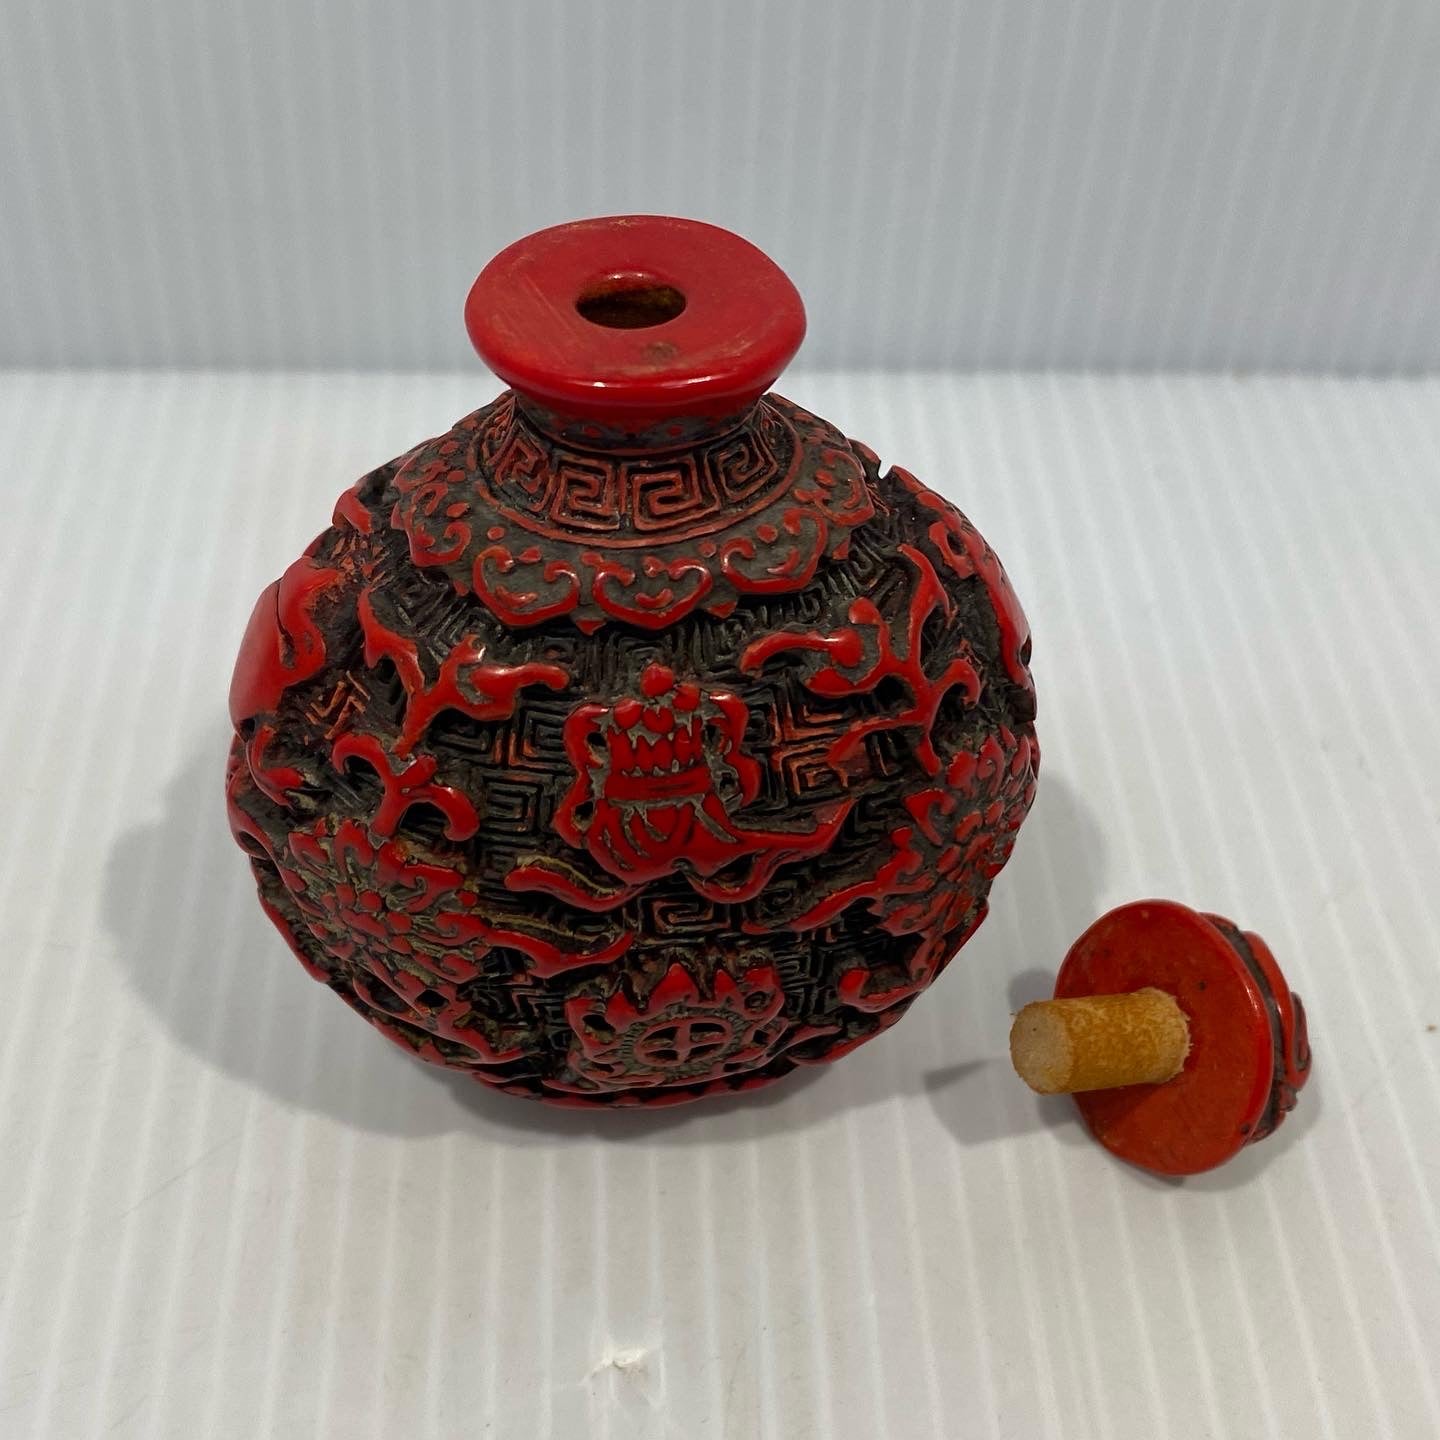 Antique Chinese Cinnabar lacquer snuff bottle, carved  with Buddha Symbols. Original stopper. Early 20th century.